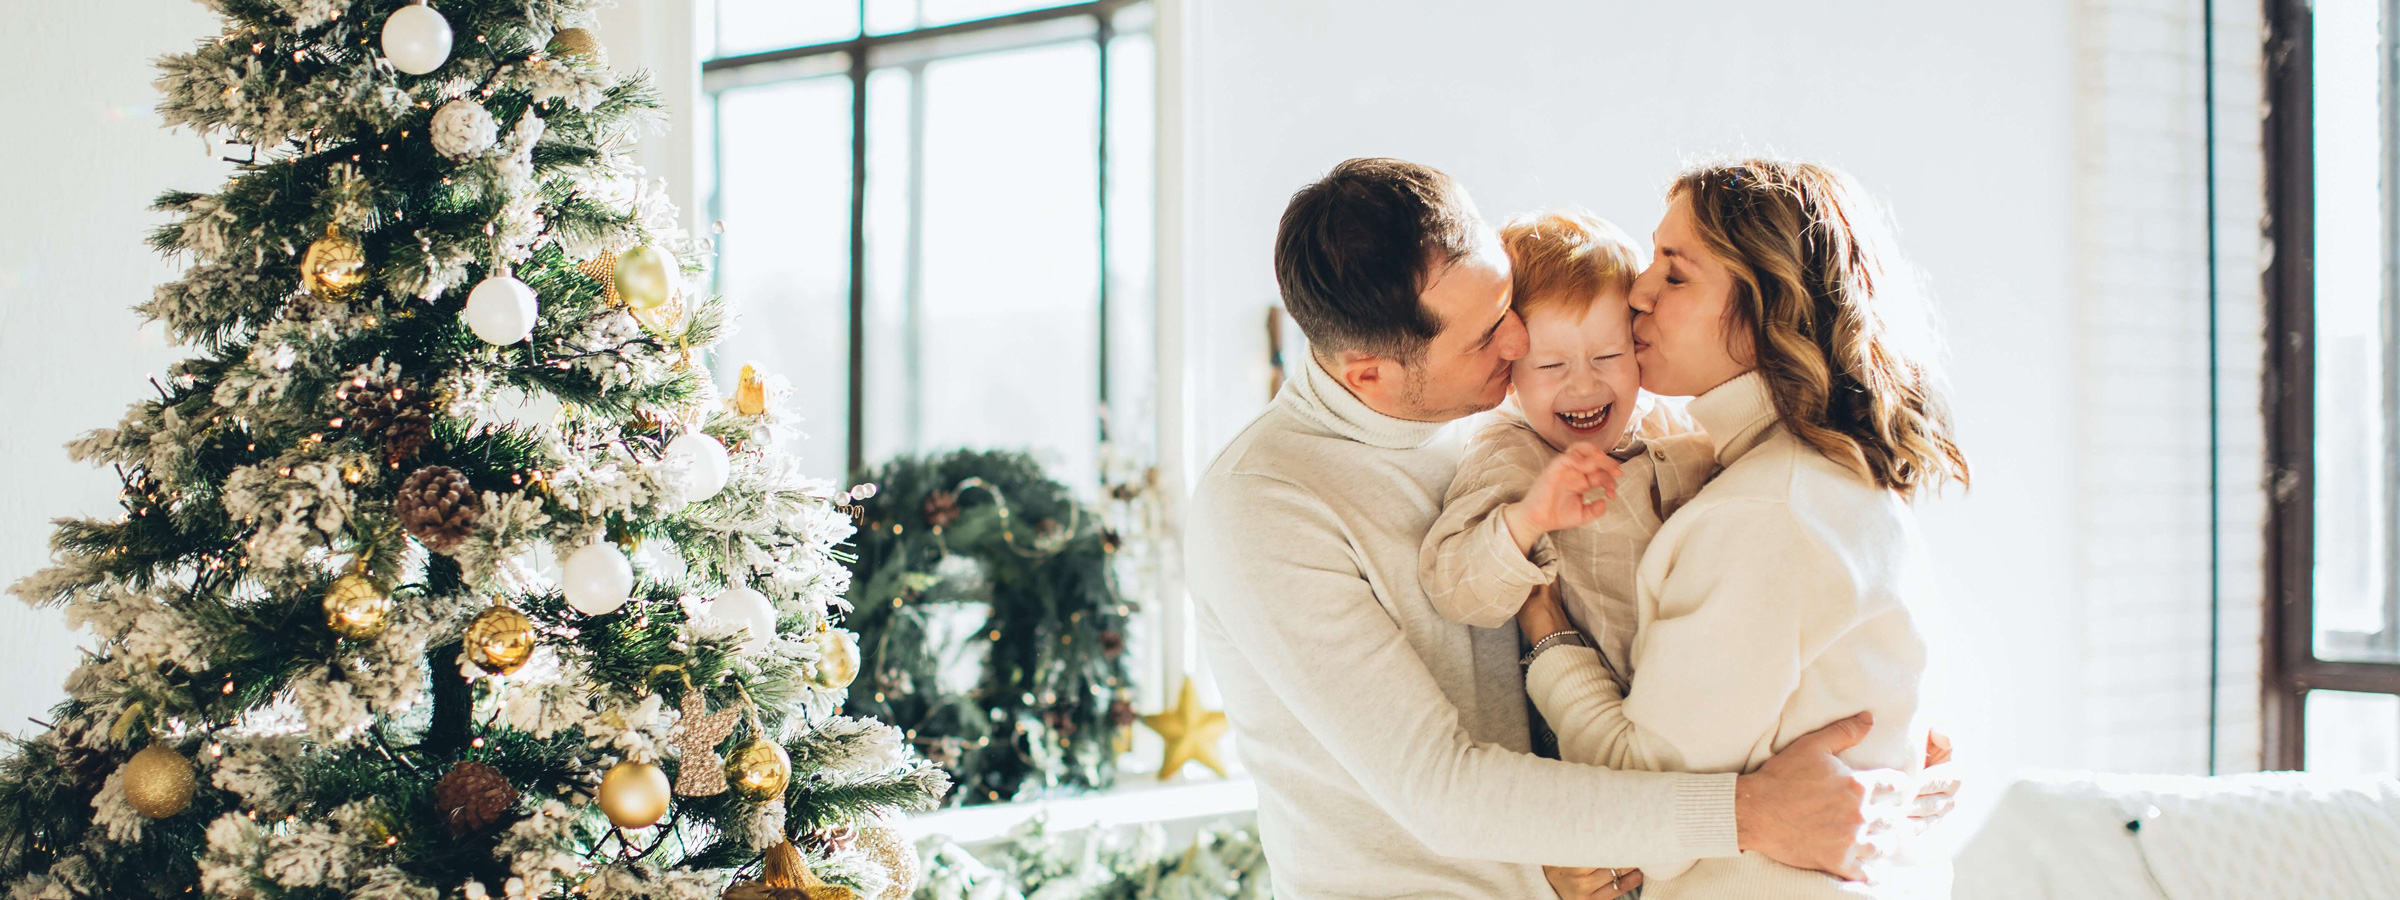 Family Christmas mini session - 6 tips to plan successful mini sessions